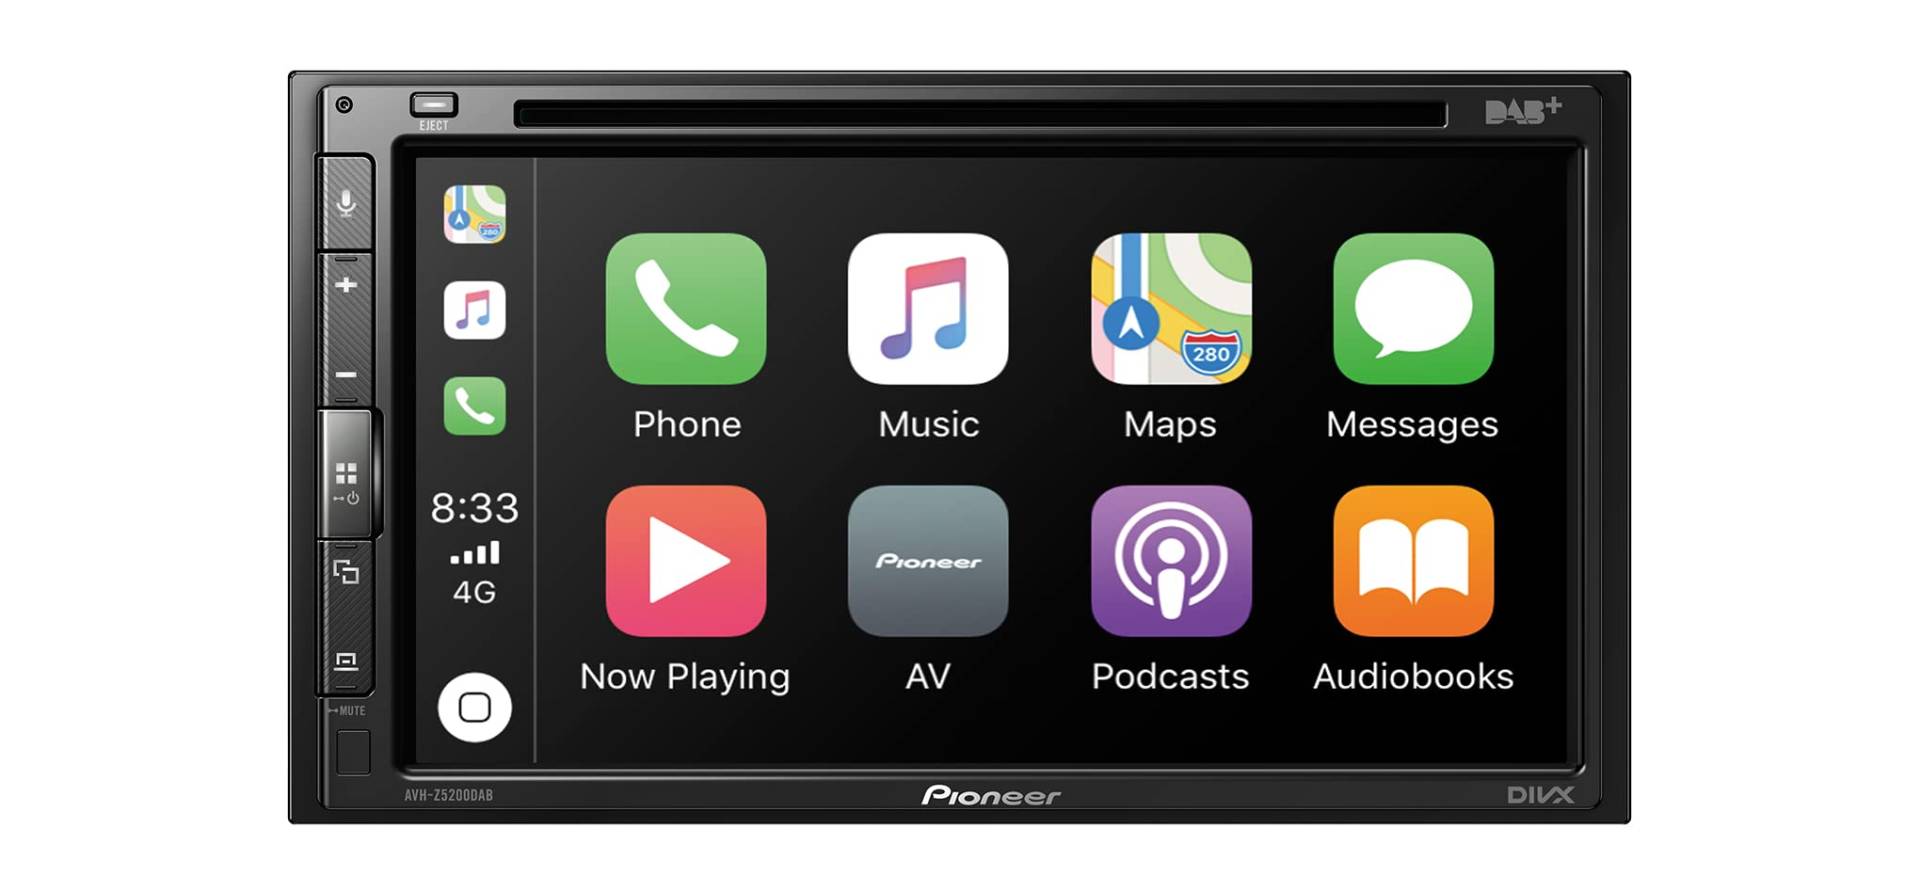 Pioneer AVH-Z5200DAB-AN inklusive DAB-Antenne, 2-DIN-Multimedia Player, 6,8-Zoll ClearType-Touchscreen, USB, Apple CarPlay, Android Auto, DAB/DAB+Digitalradio, Bluetooth, 13-Band-Grafikequalizer von Pioneer